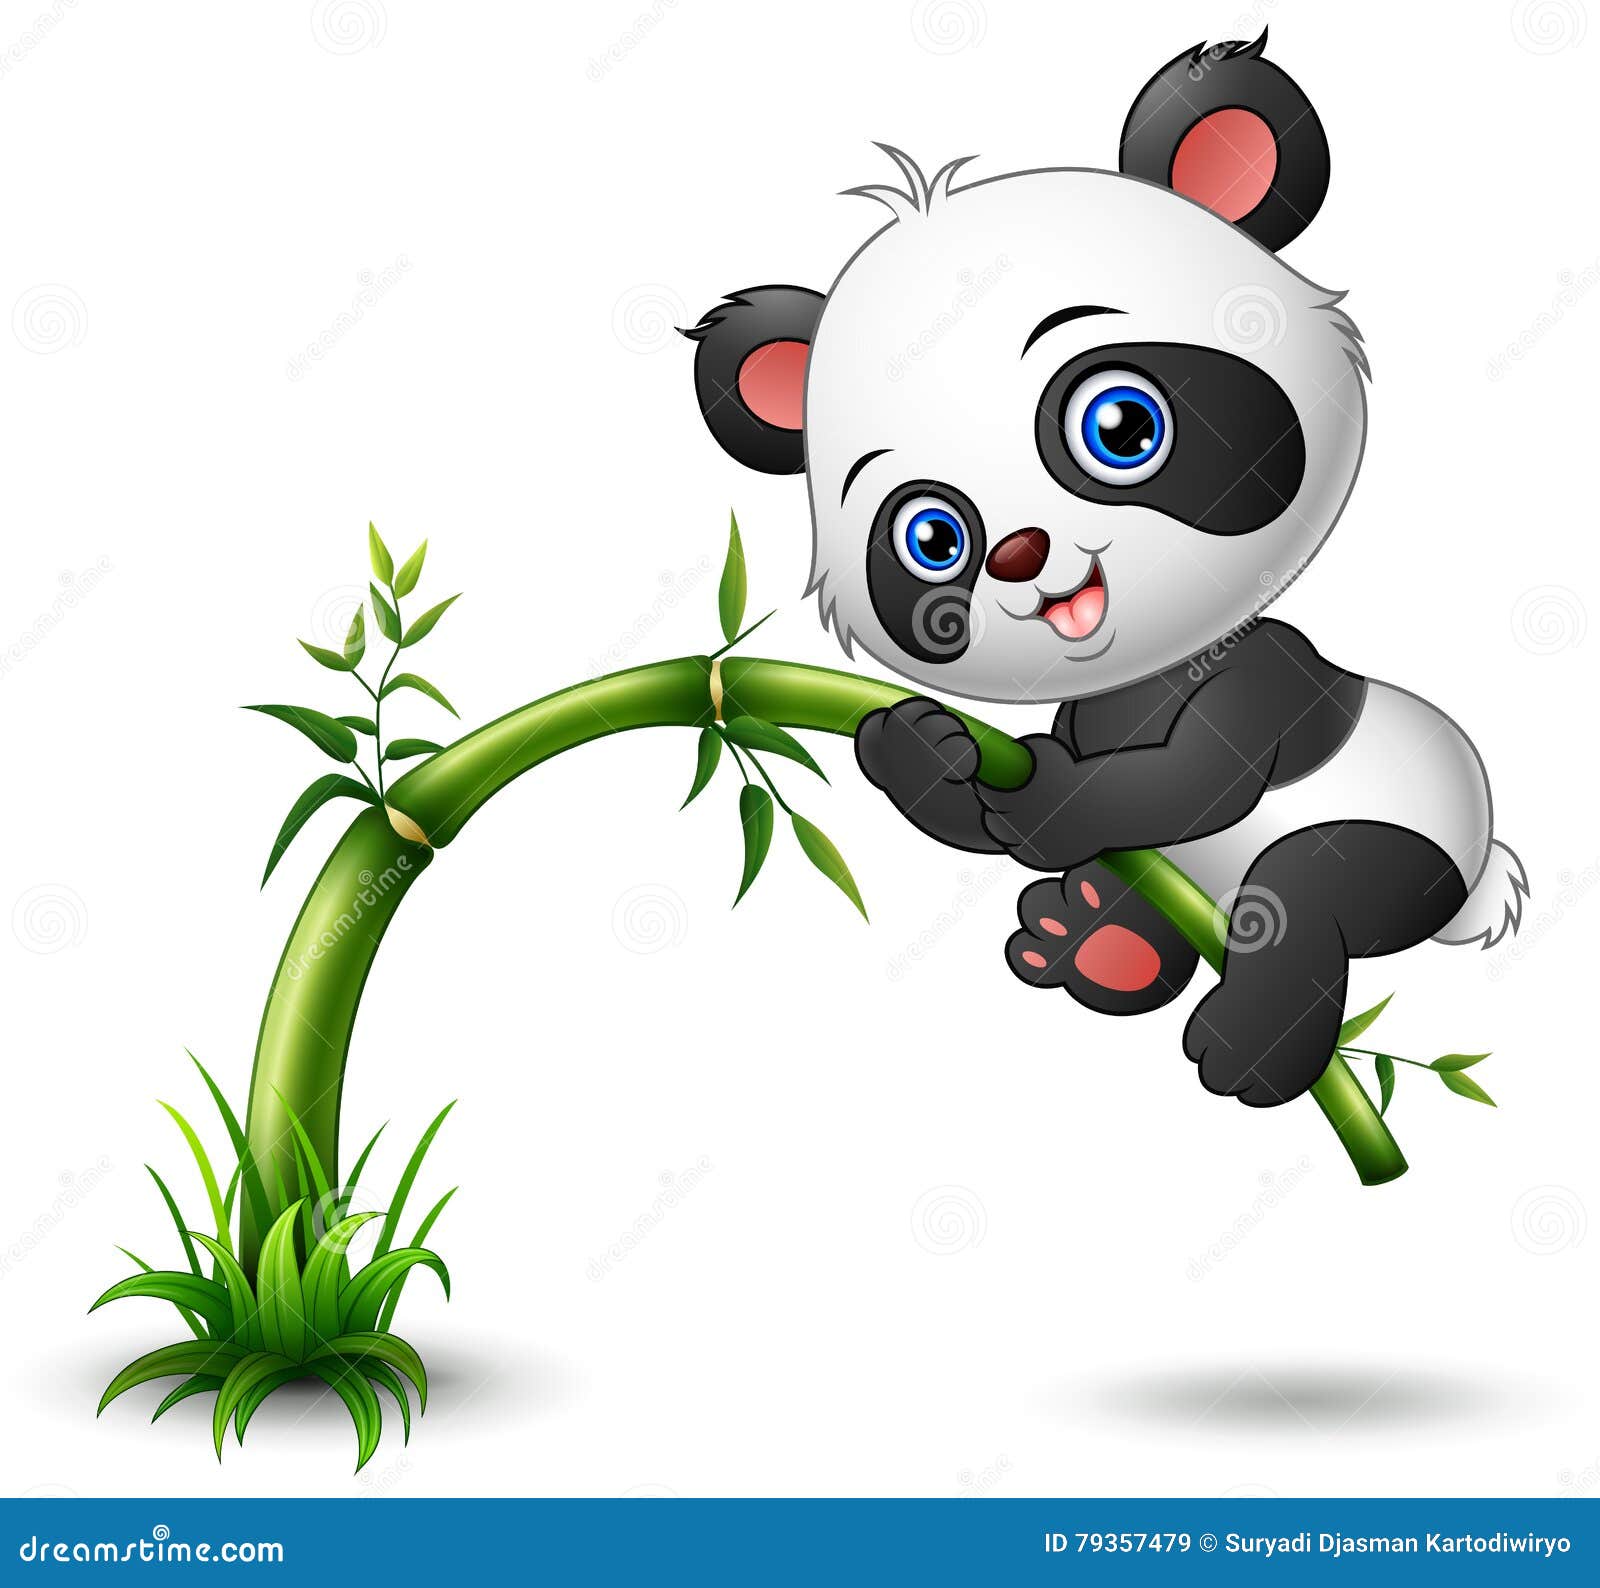 Cute Baby Panda Tree Climbing Bamboo Stock Vector - Illustration of forest,  clip: 79357479